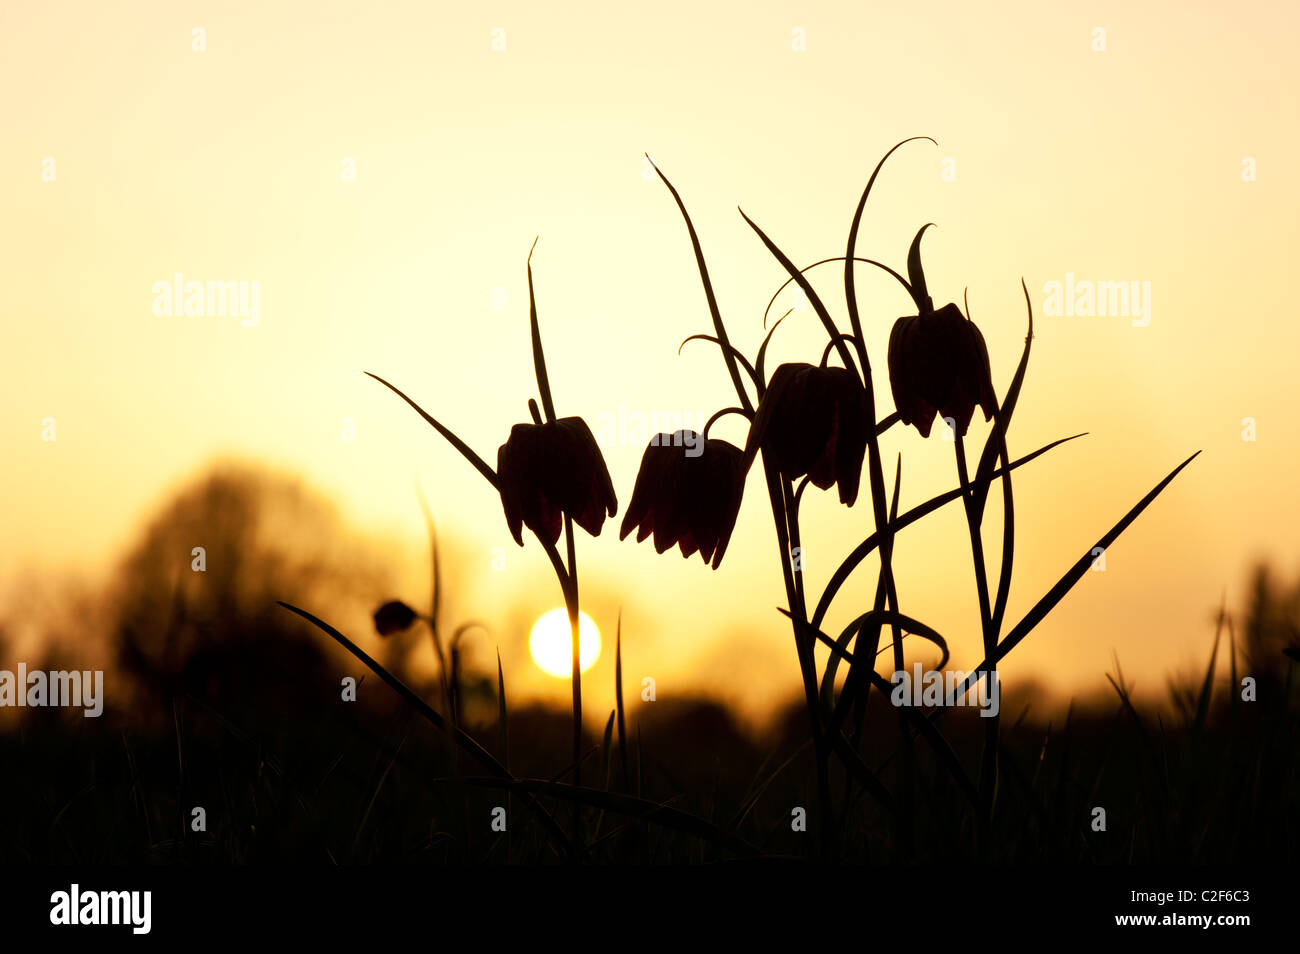 Fritillaria meleagris. Snakes head fritillary wildflowers in the English countryside at sunset. Ducklington, Oxfordshire. UK. Silhouette Stock Photo